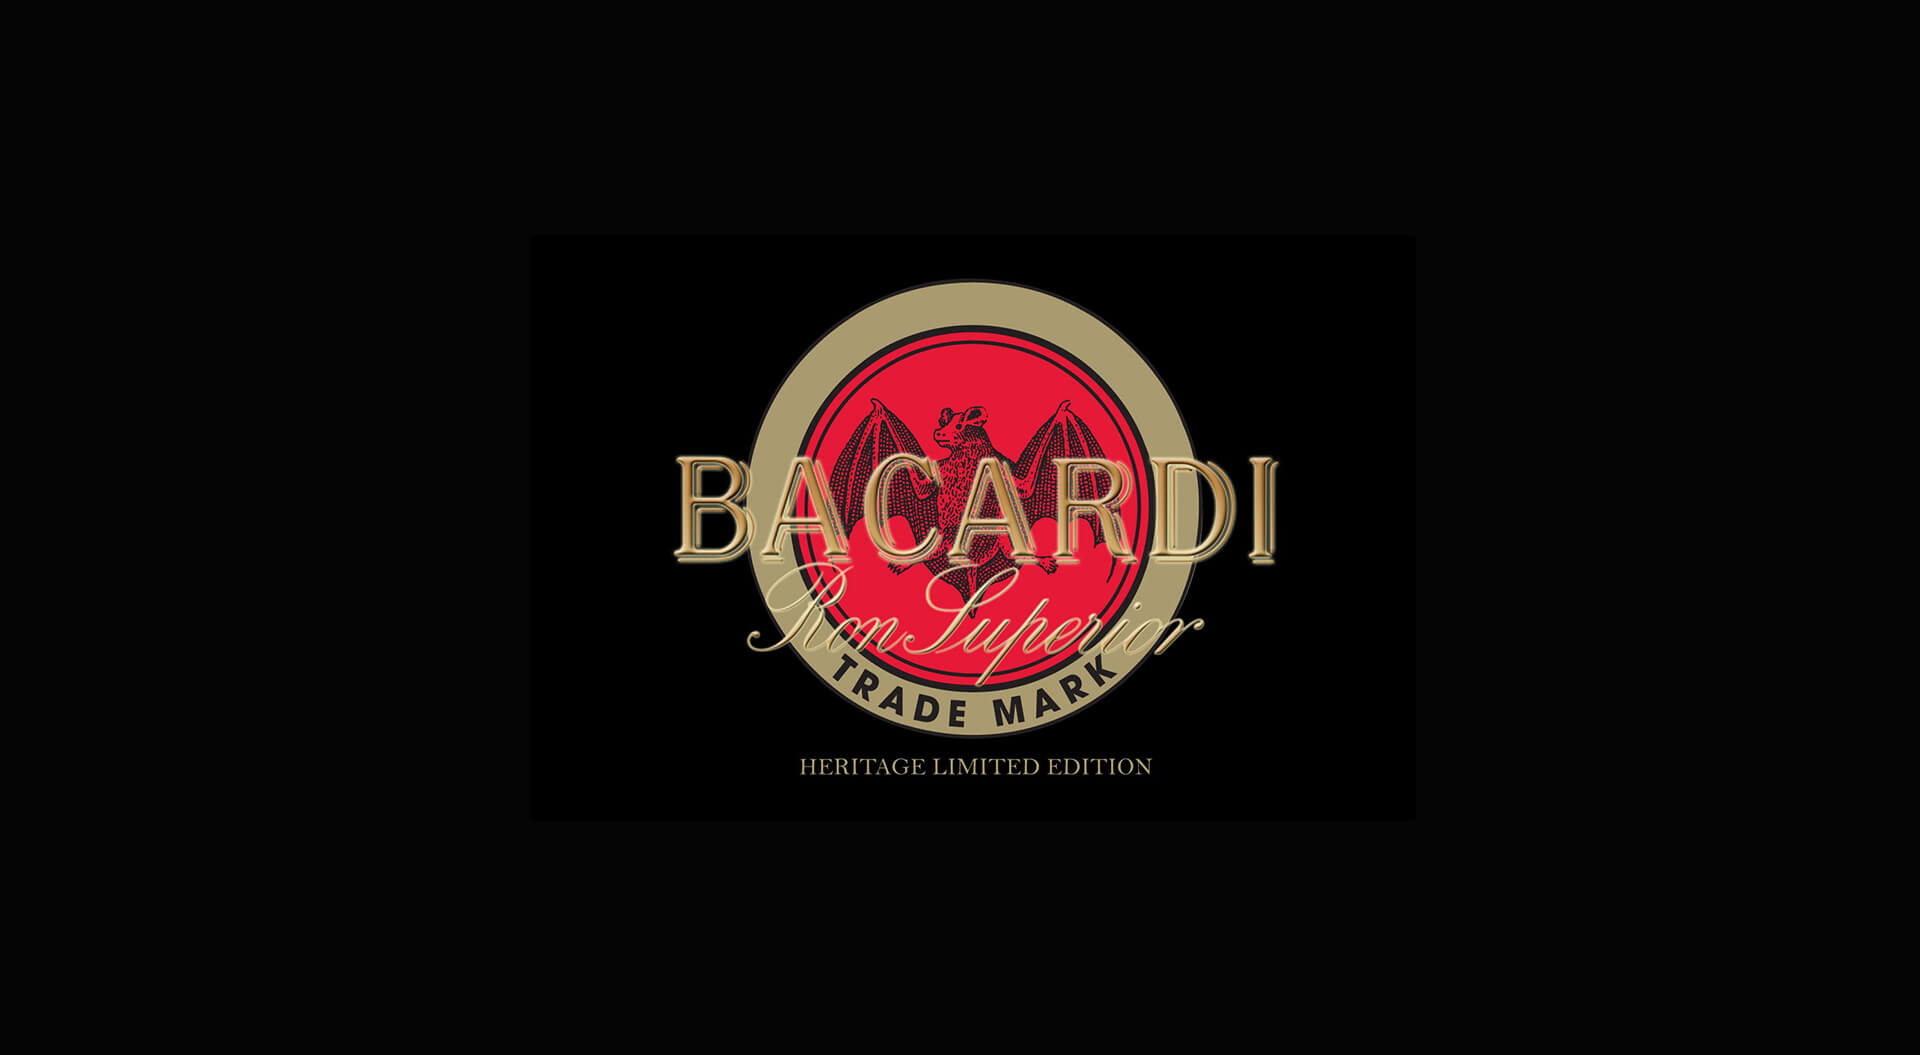 Spirits industry promotion campaigns travel retail, strategy marketing, retail design, airports, duty-free alcohol marketing, innovative concepts ideas Bacardi Global Travel Retail, brand Bacardi Heritage Limited Edition